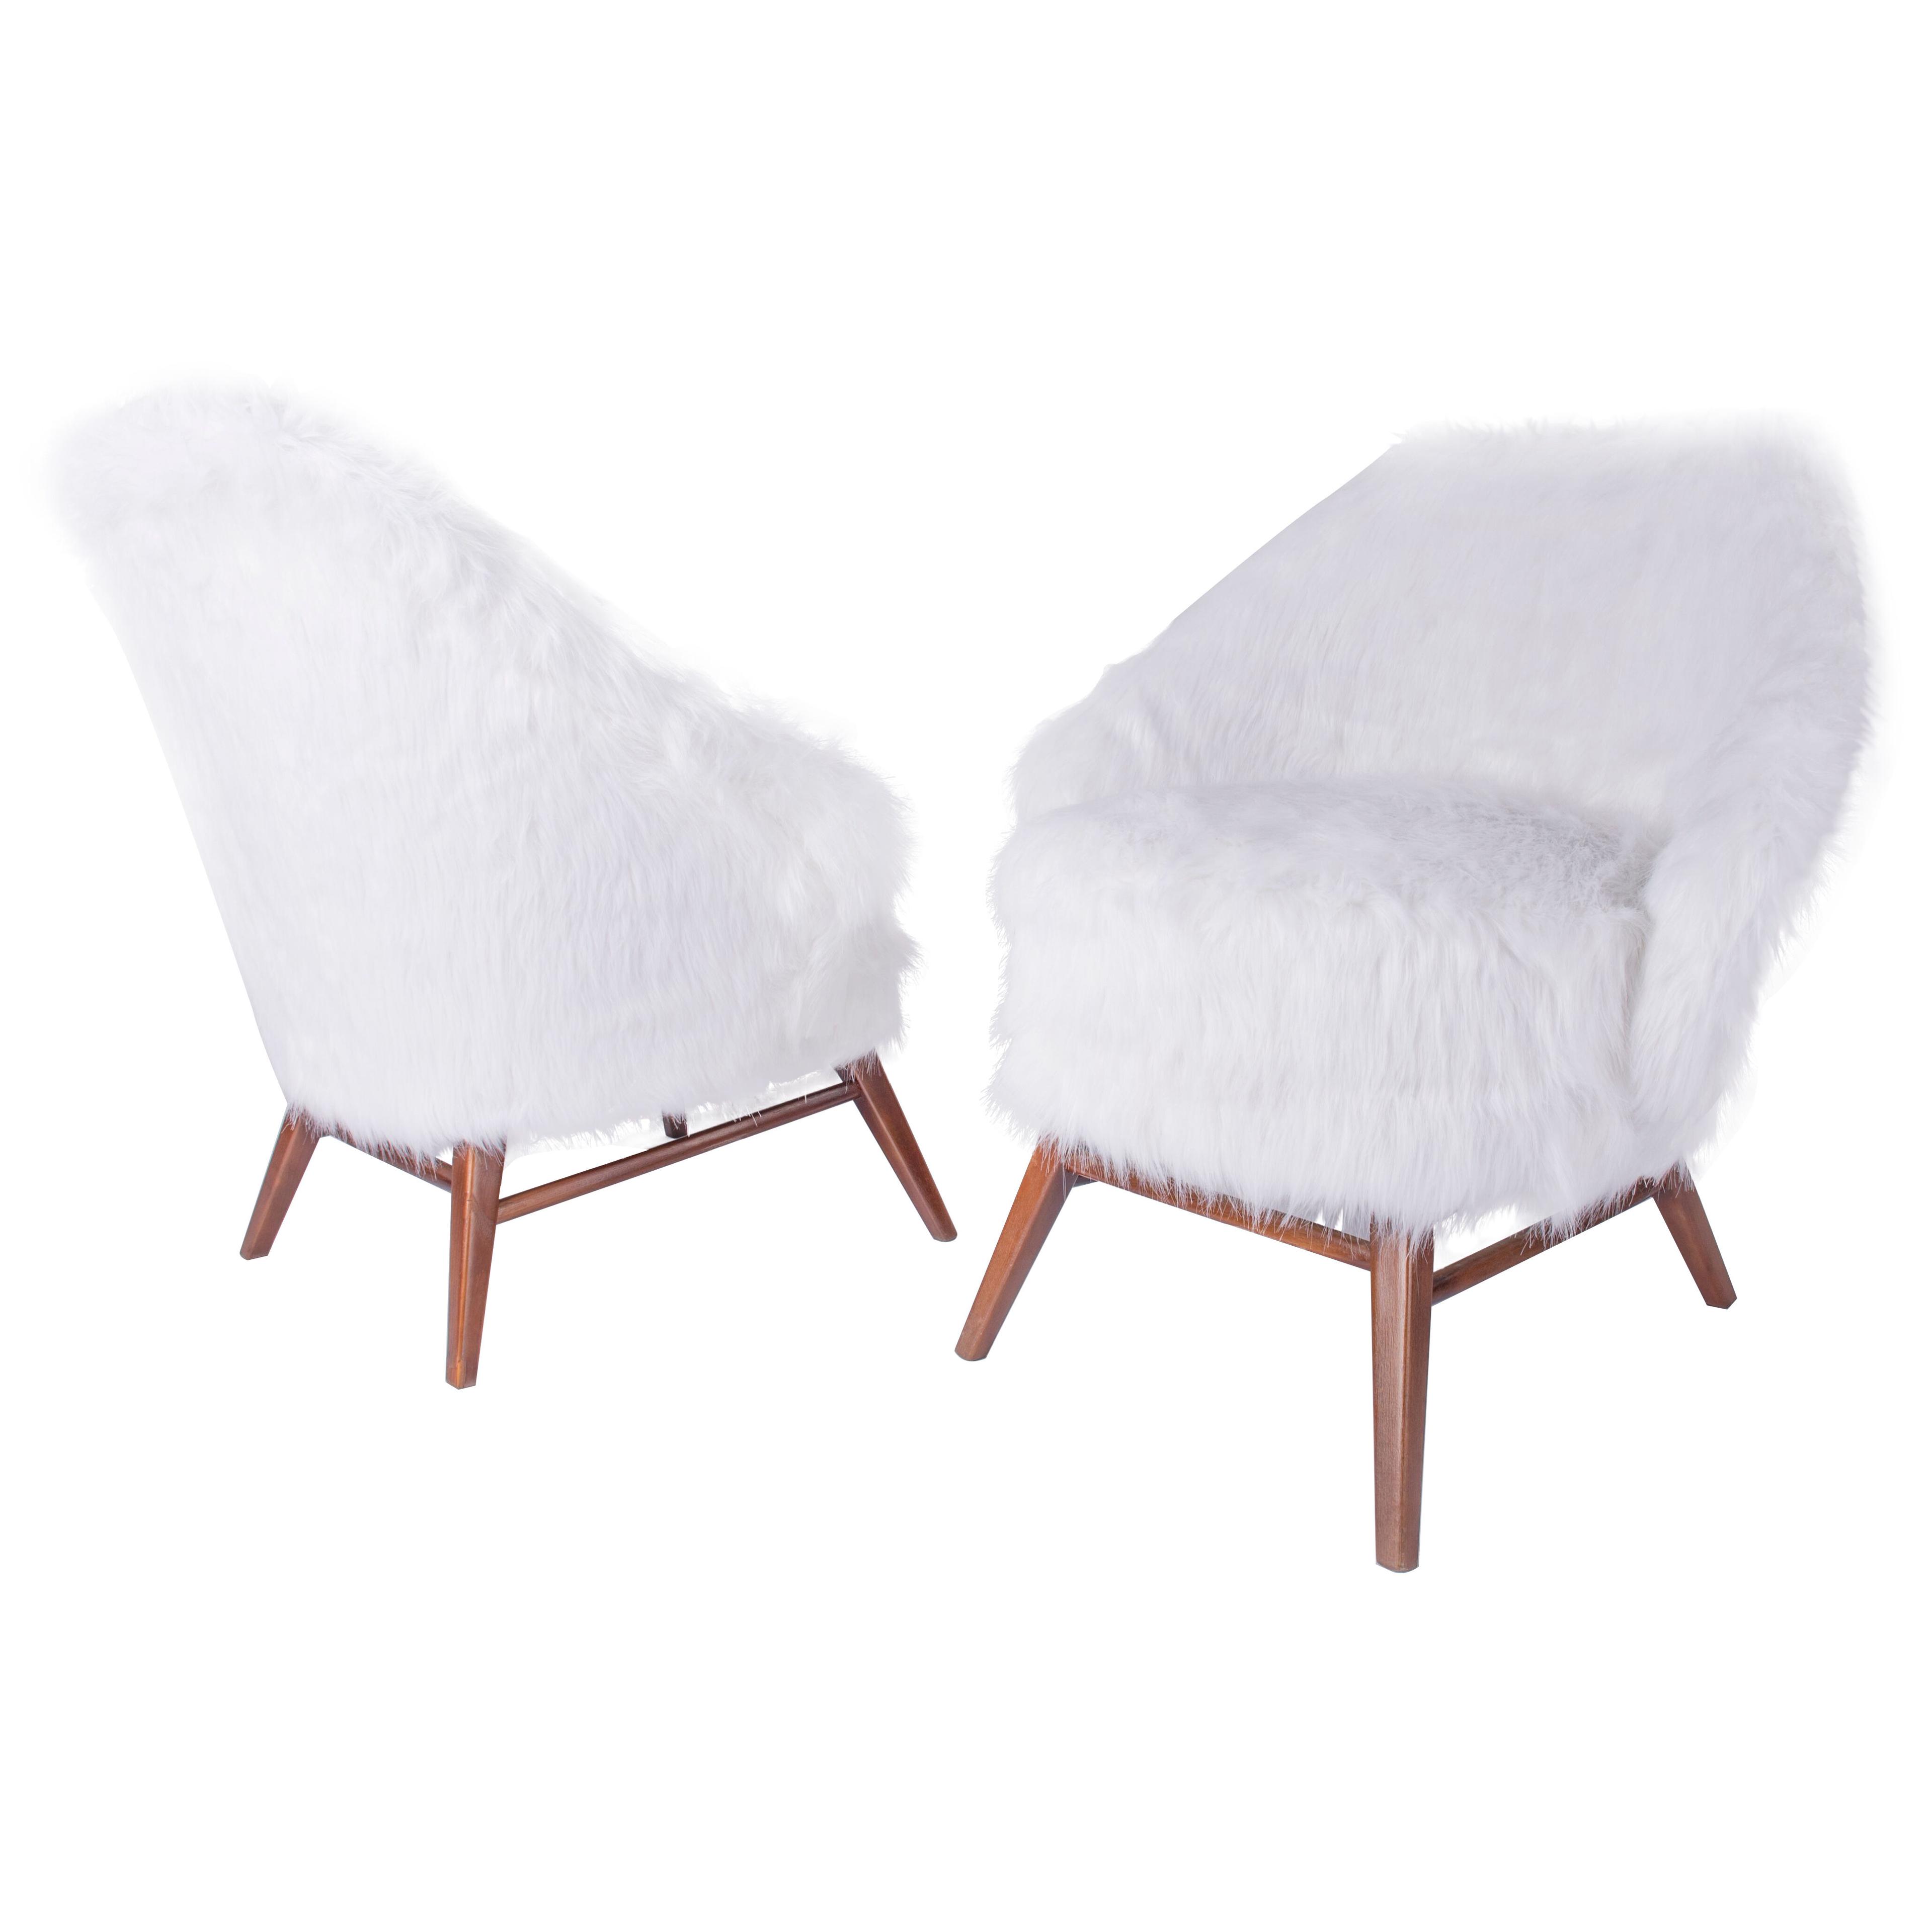 Set of 2 Mid 20th century vintage faux fur armchairs